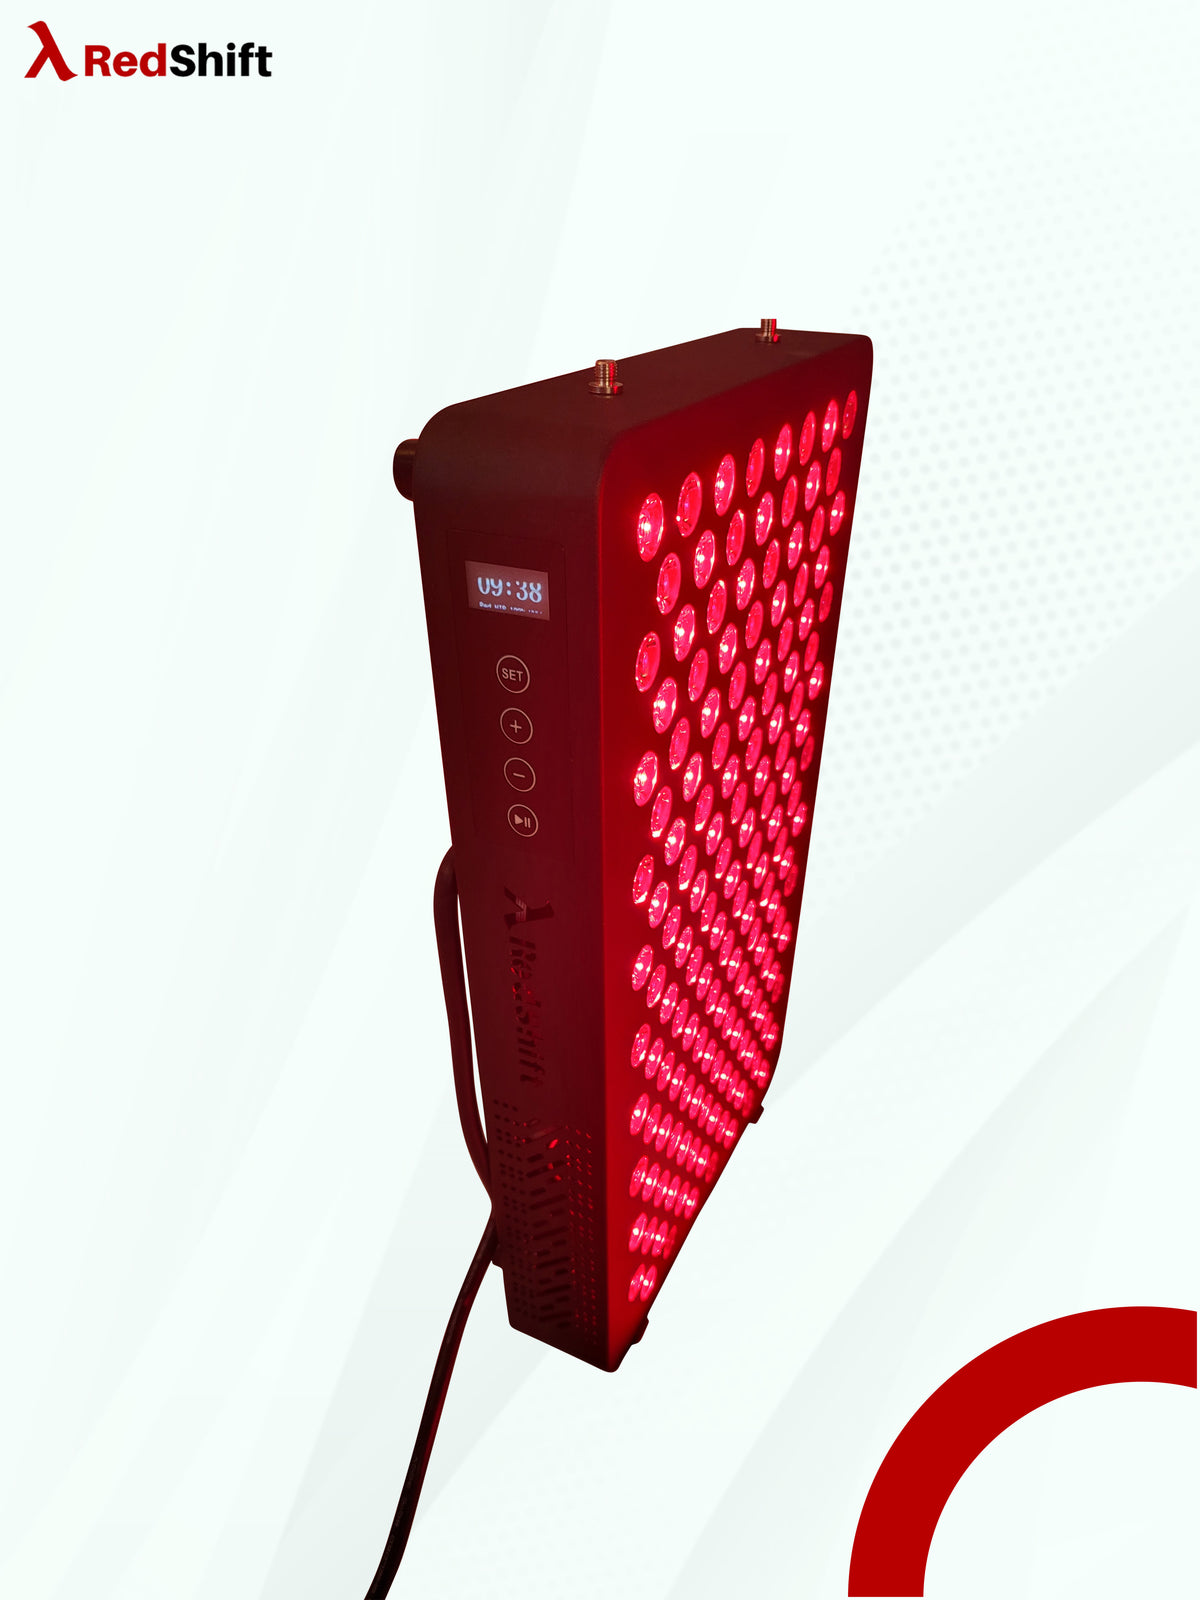 RedShift RST500 MAX - Portable At Home Red Light Therapy Devices for Skin, Face and Pain Relief